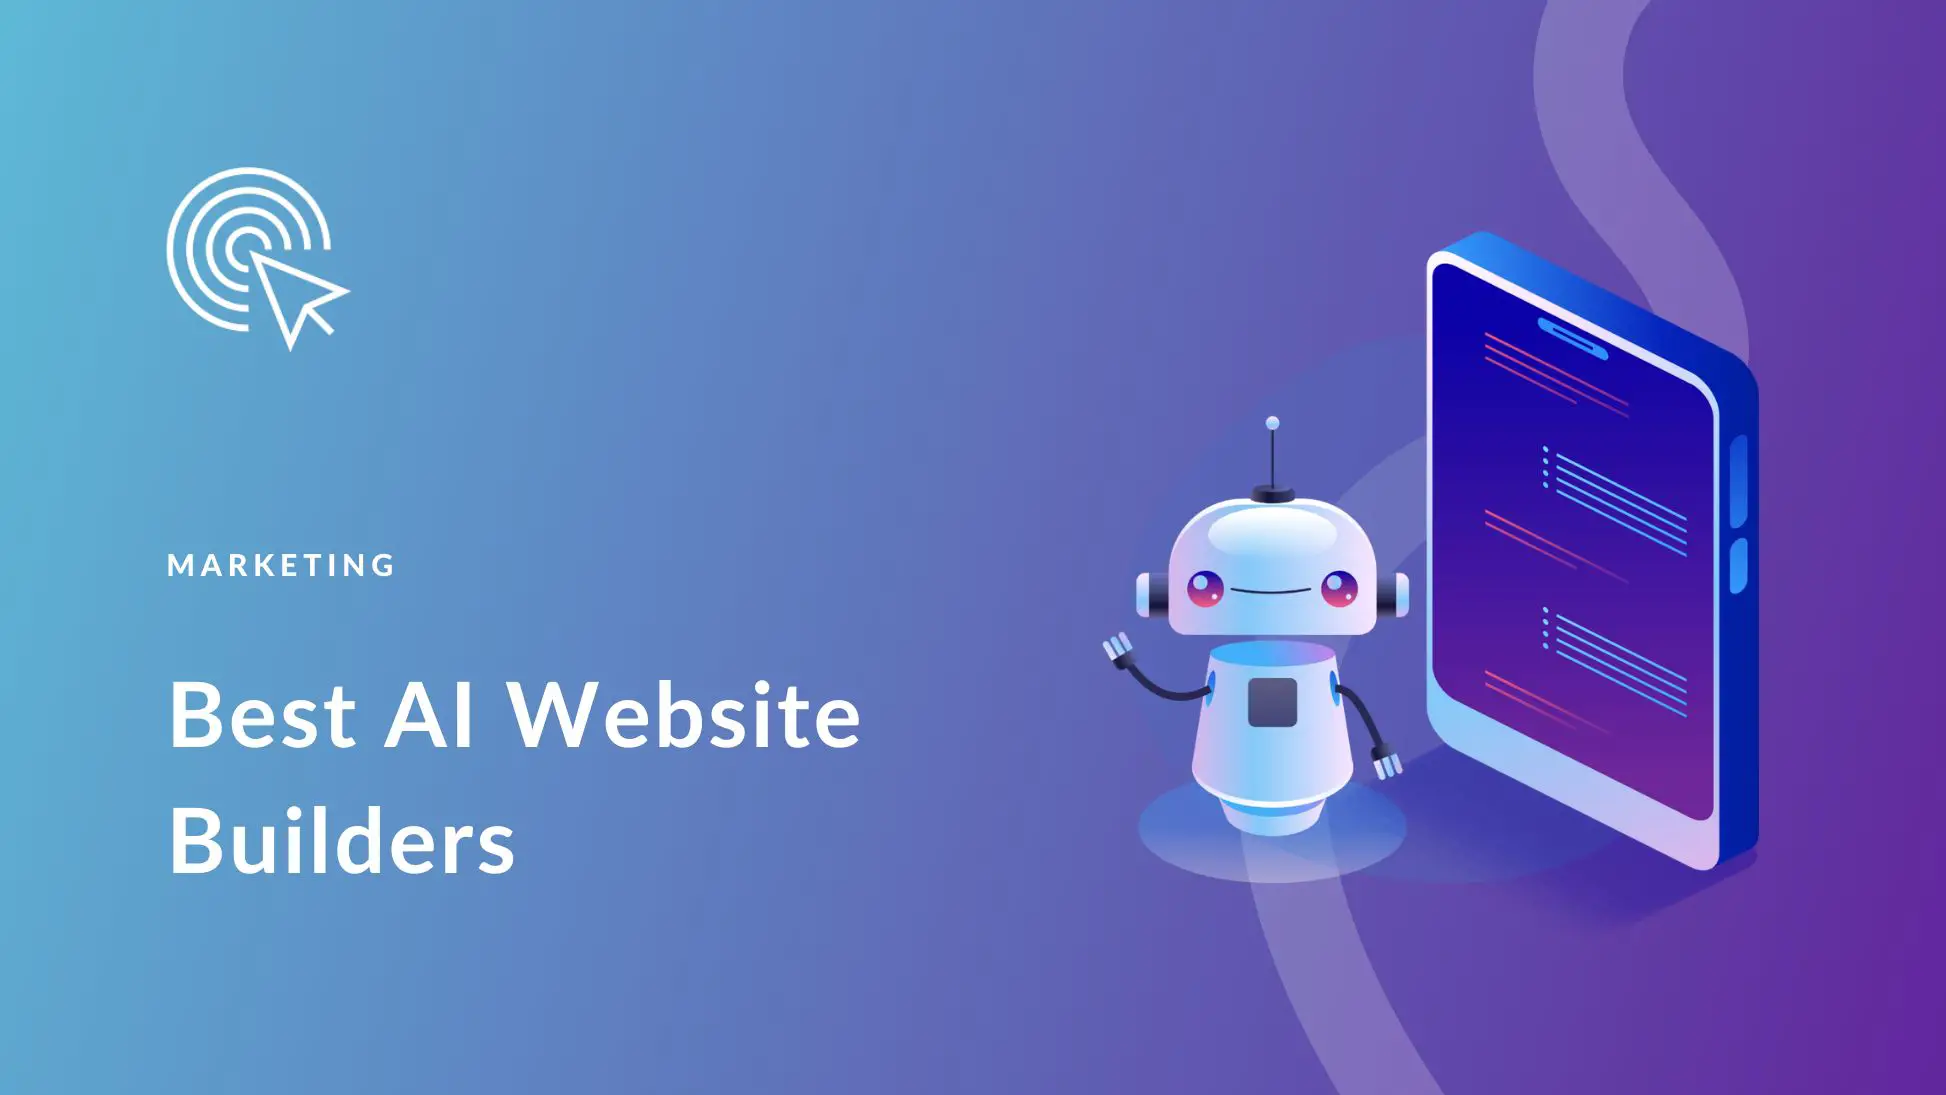 3 Best AI Website Builders to Launch a Business Right Now (No Coding!)